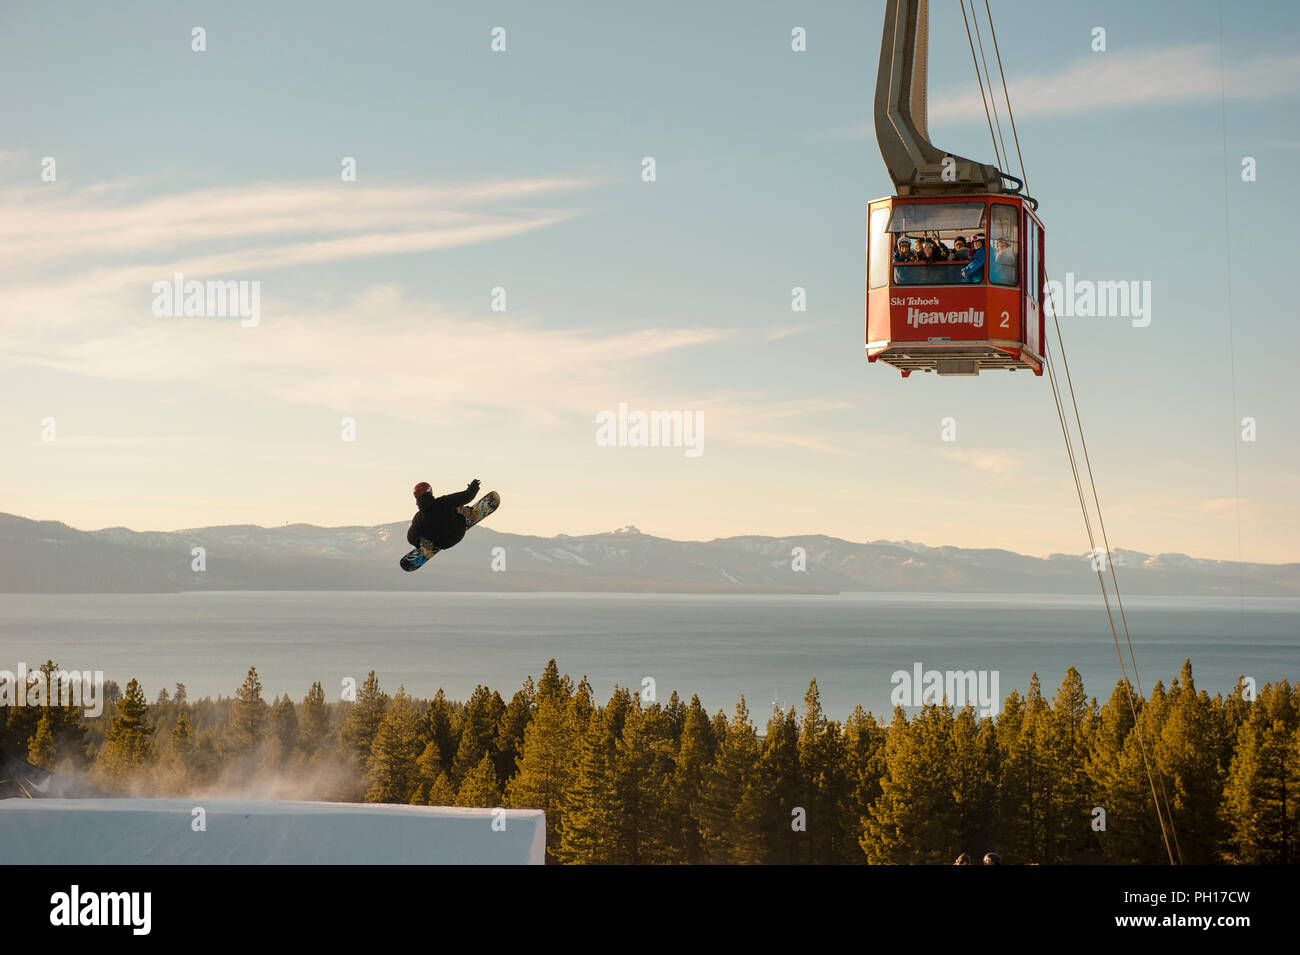 Big Air snowboarding competition at Heavenly Valley Ski Resort in South Lake Tahoe, California, North America Stock Photo